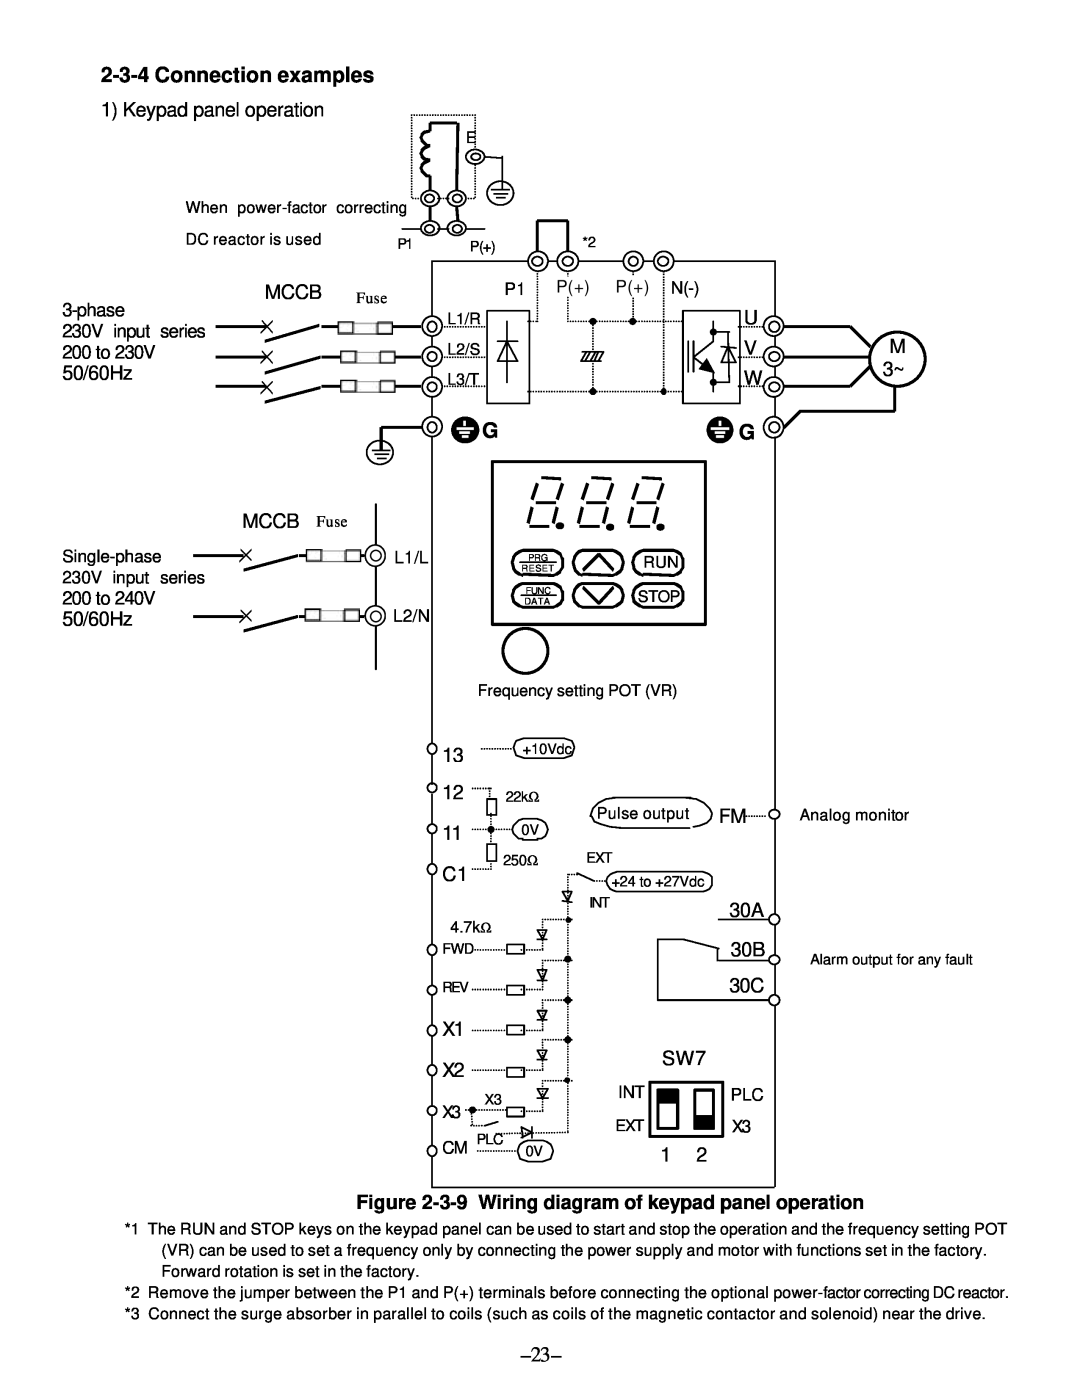 GE C11, AF-300 manual 3-9 Wiring diagram of keypad panel operation, Connection examples 